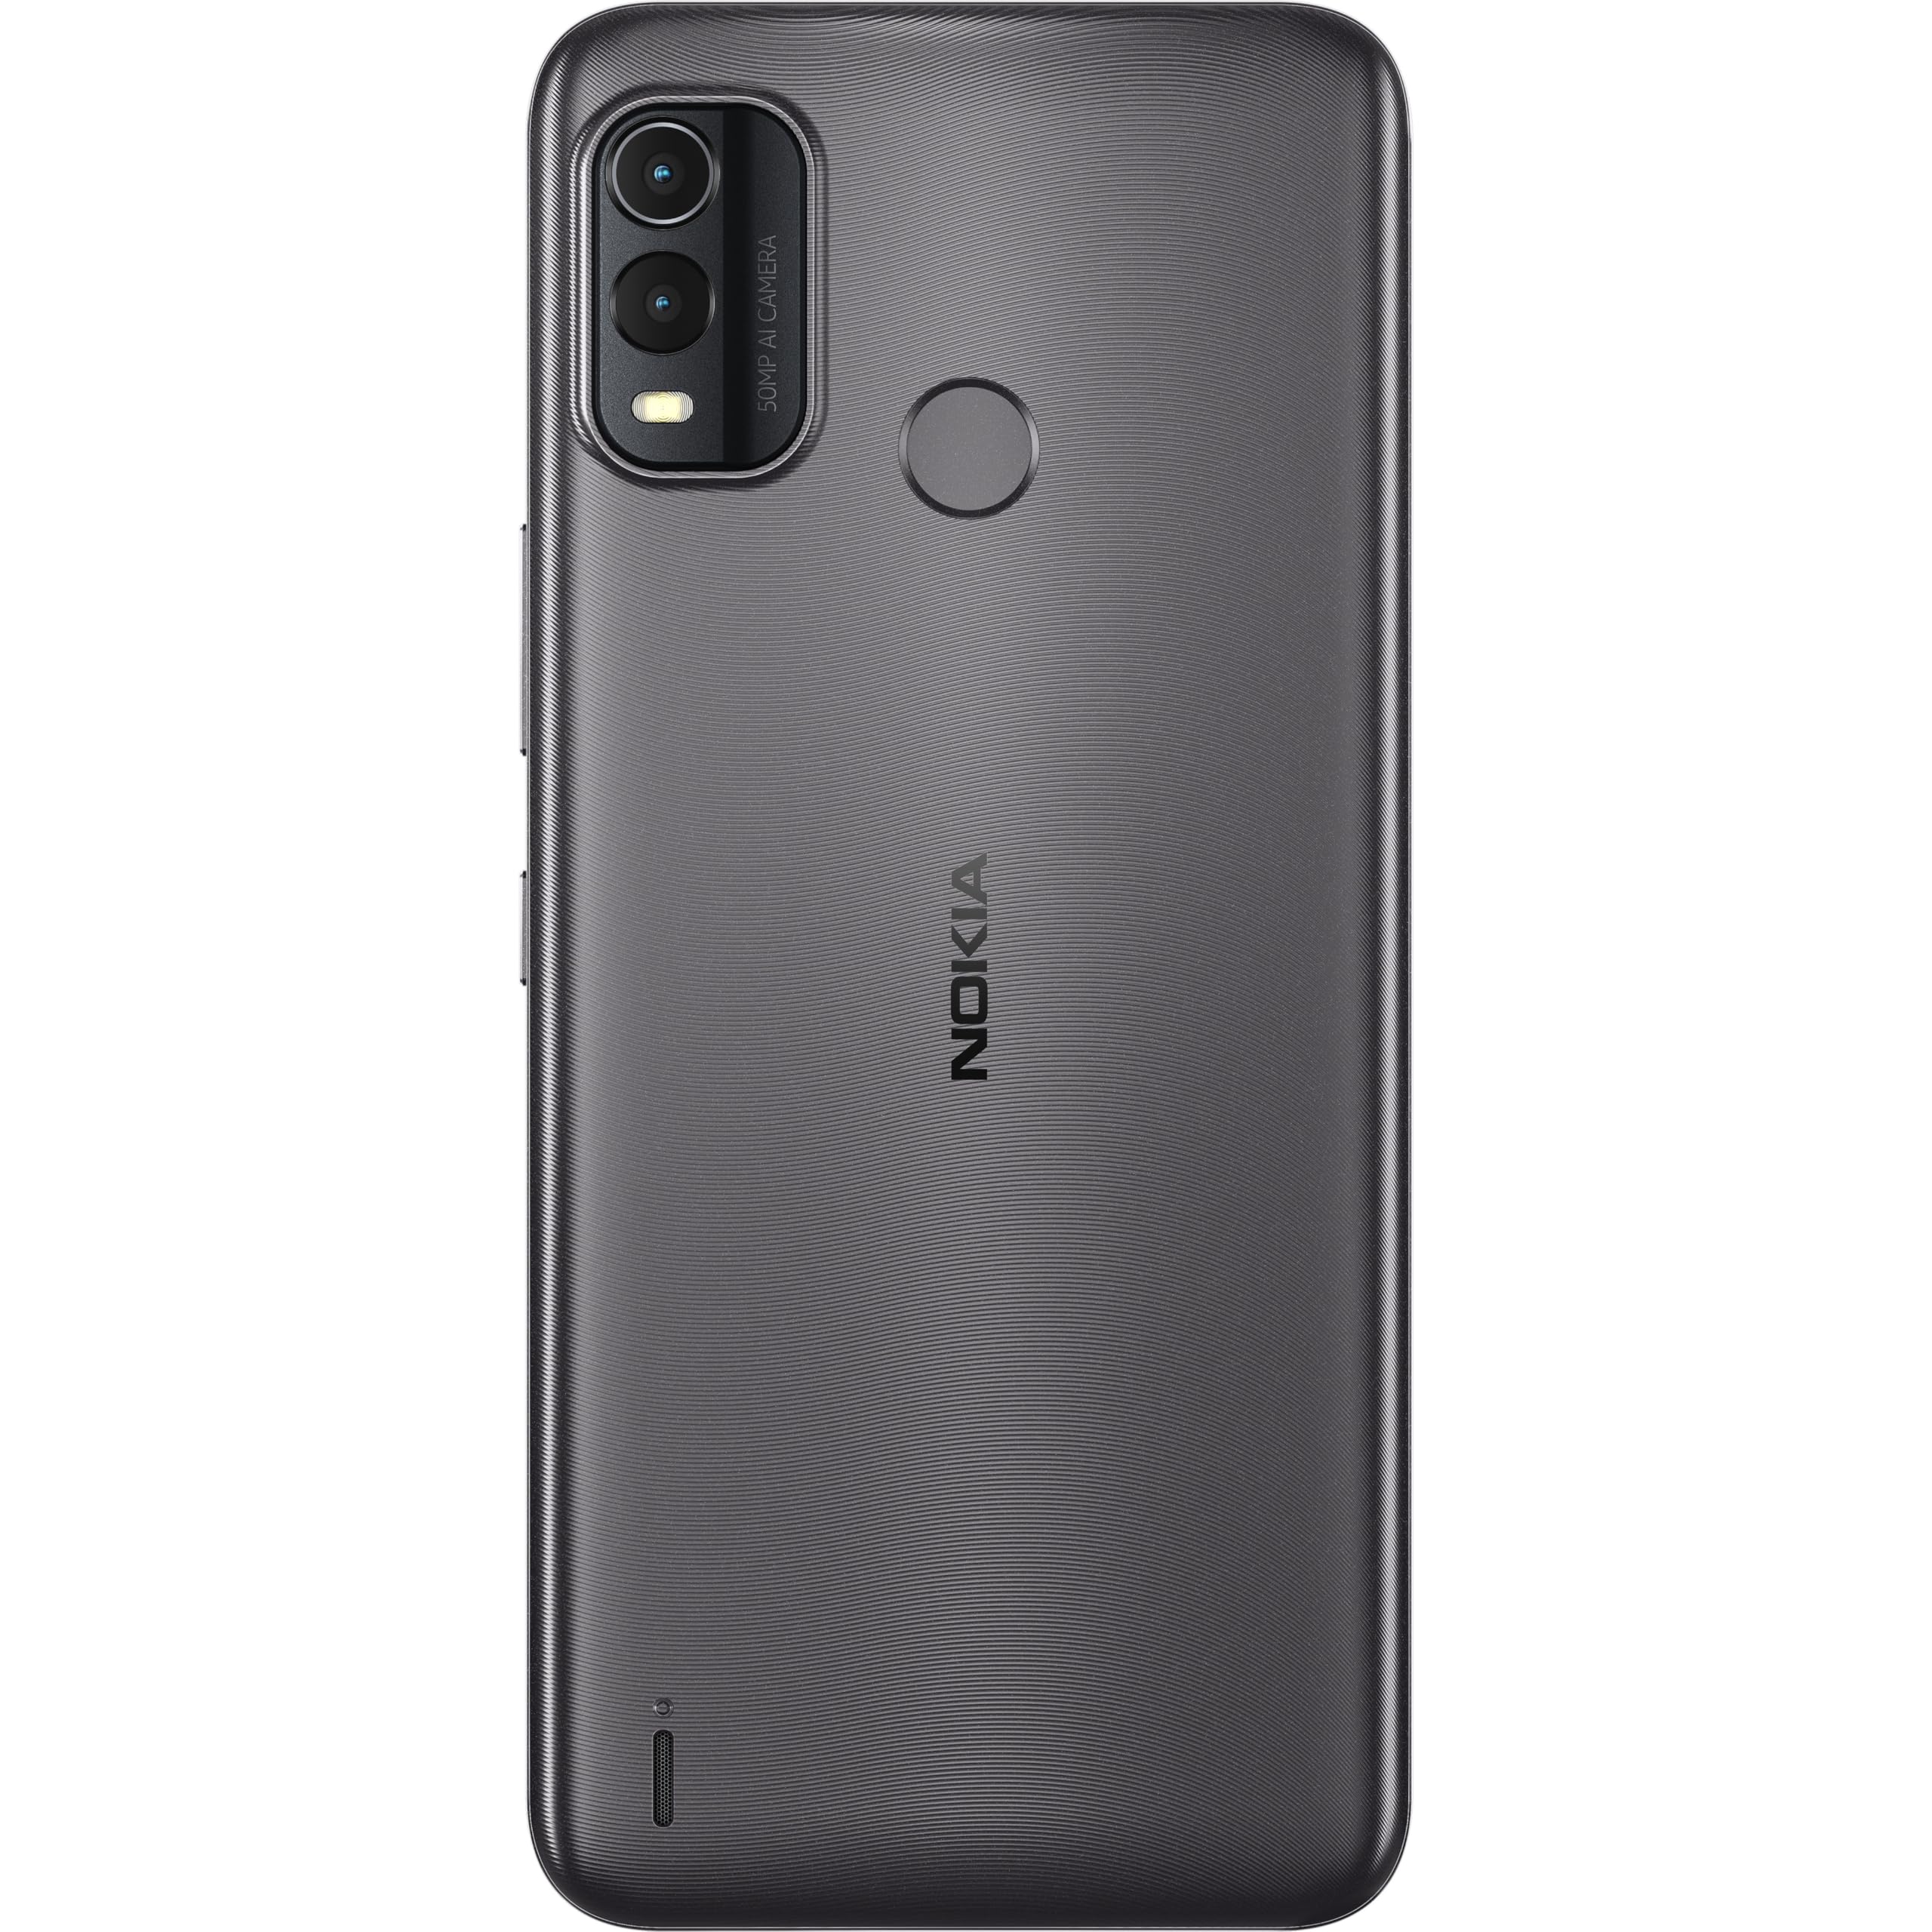 Nokia G11 Plus | Android 12 | 3-Day Battery | 50MP Camera | 3/64GB | 6.52-Inch Screen | Dual Band WiFi | Unlocked GSM Smartphone | Not Compatible with Verizon or AT&T | Charcoal